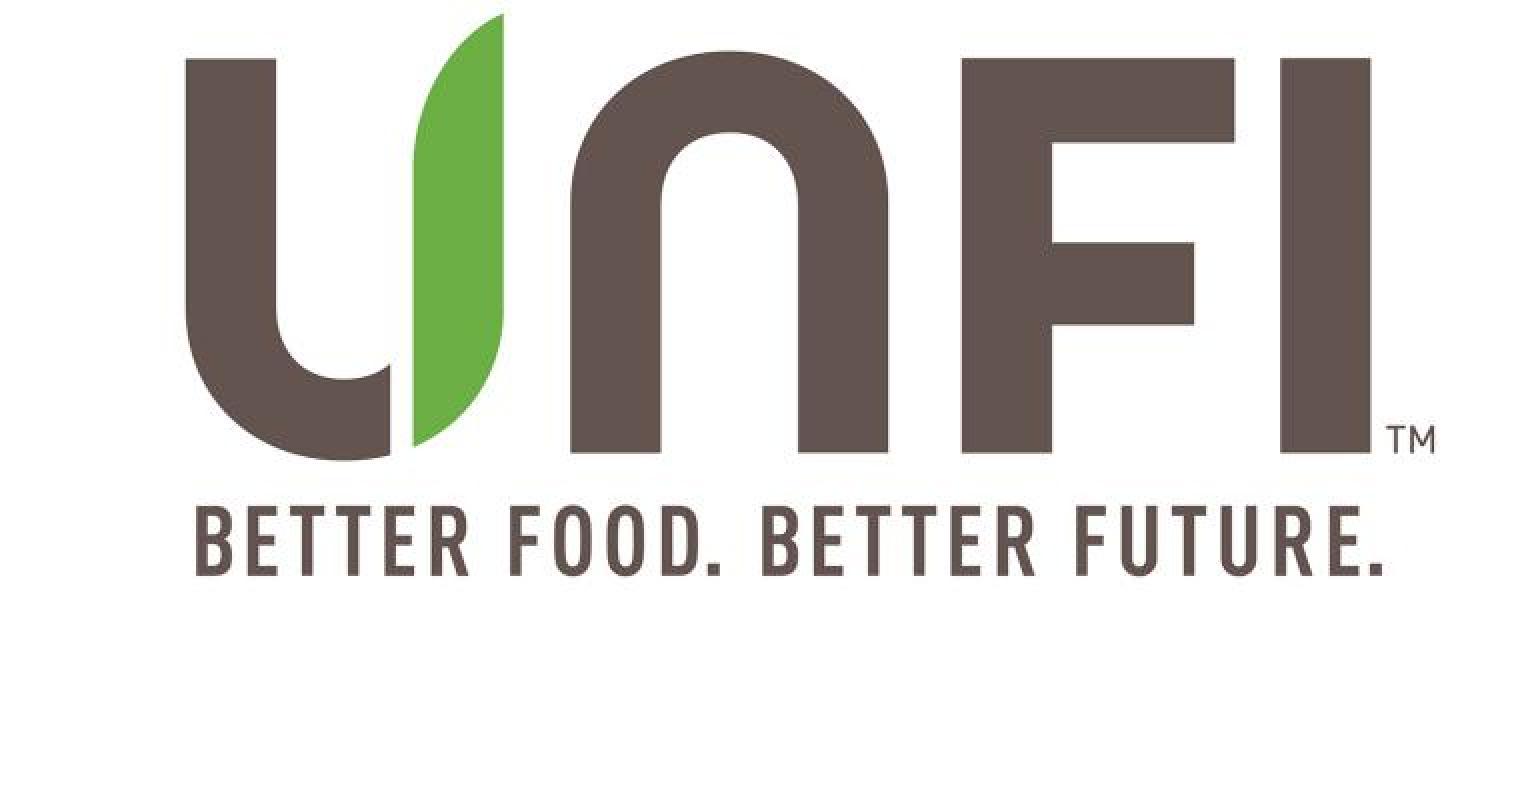 United Natural Foods to Offer Retailers Innovative Smart Shelf Tags to Better Engage Consumers, Improve Product Transparency and Help Drive Purchase Decisions